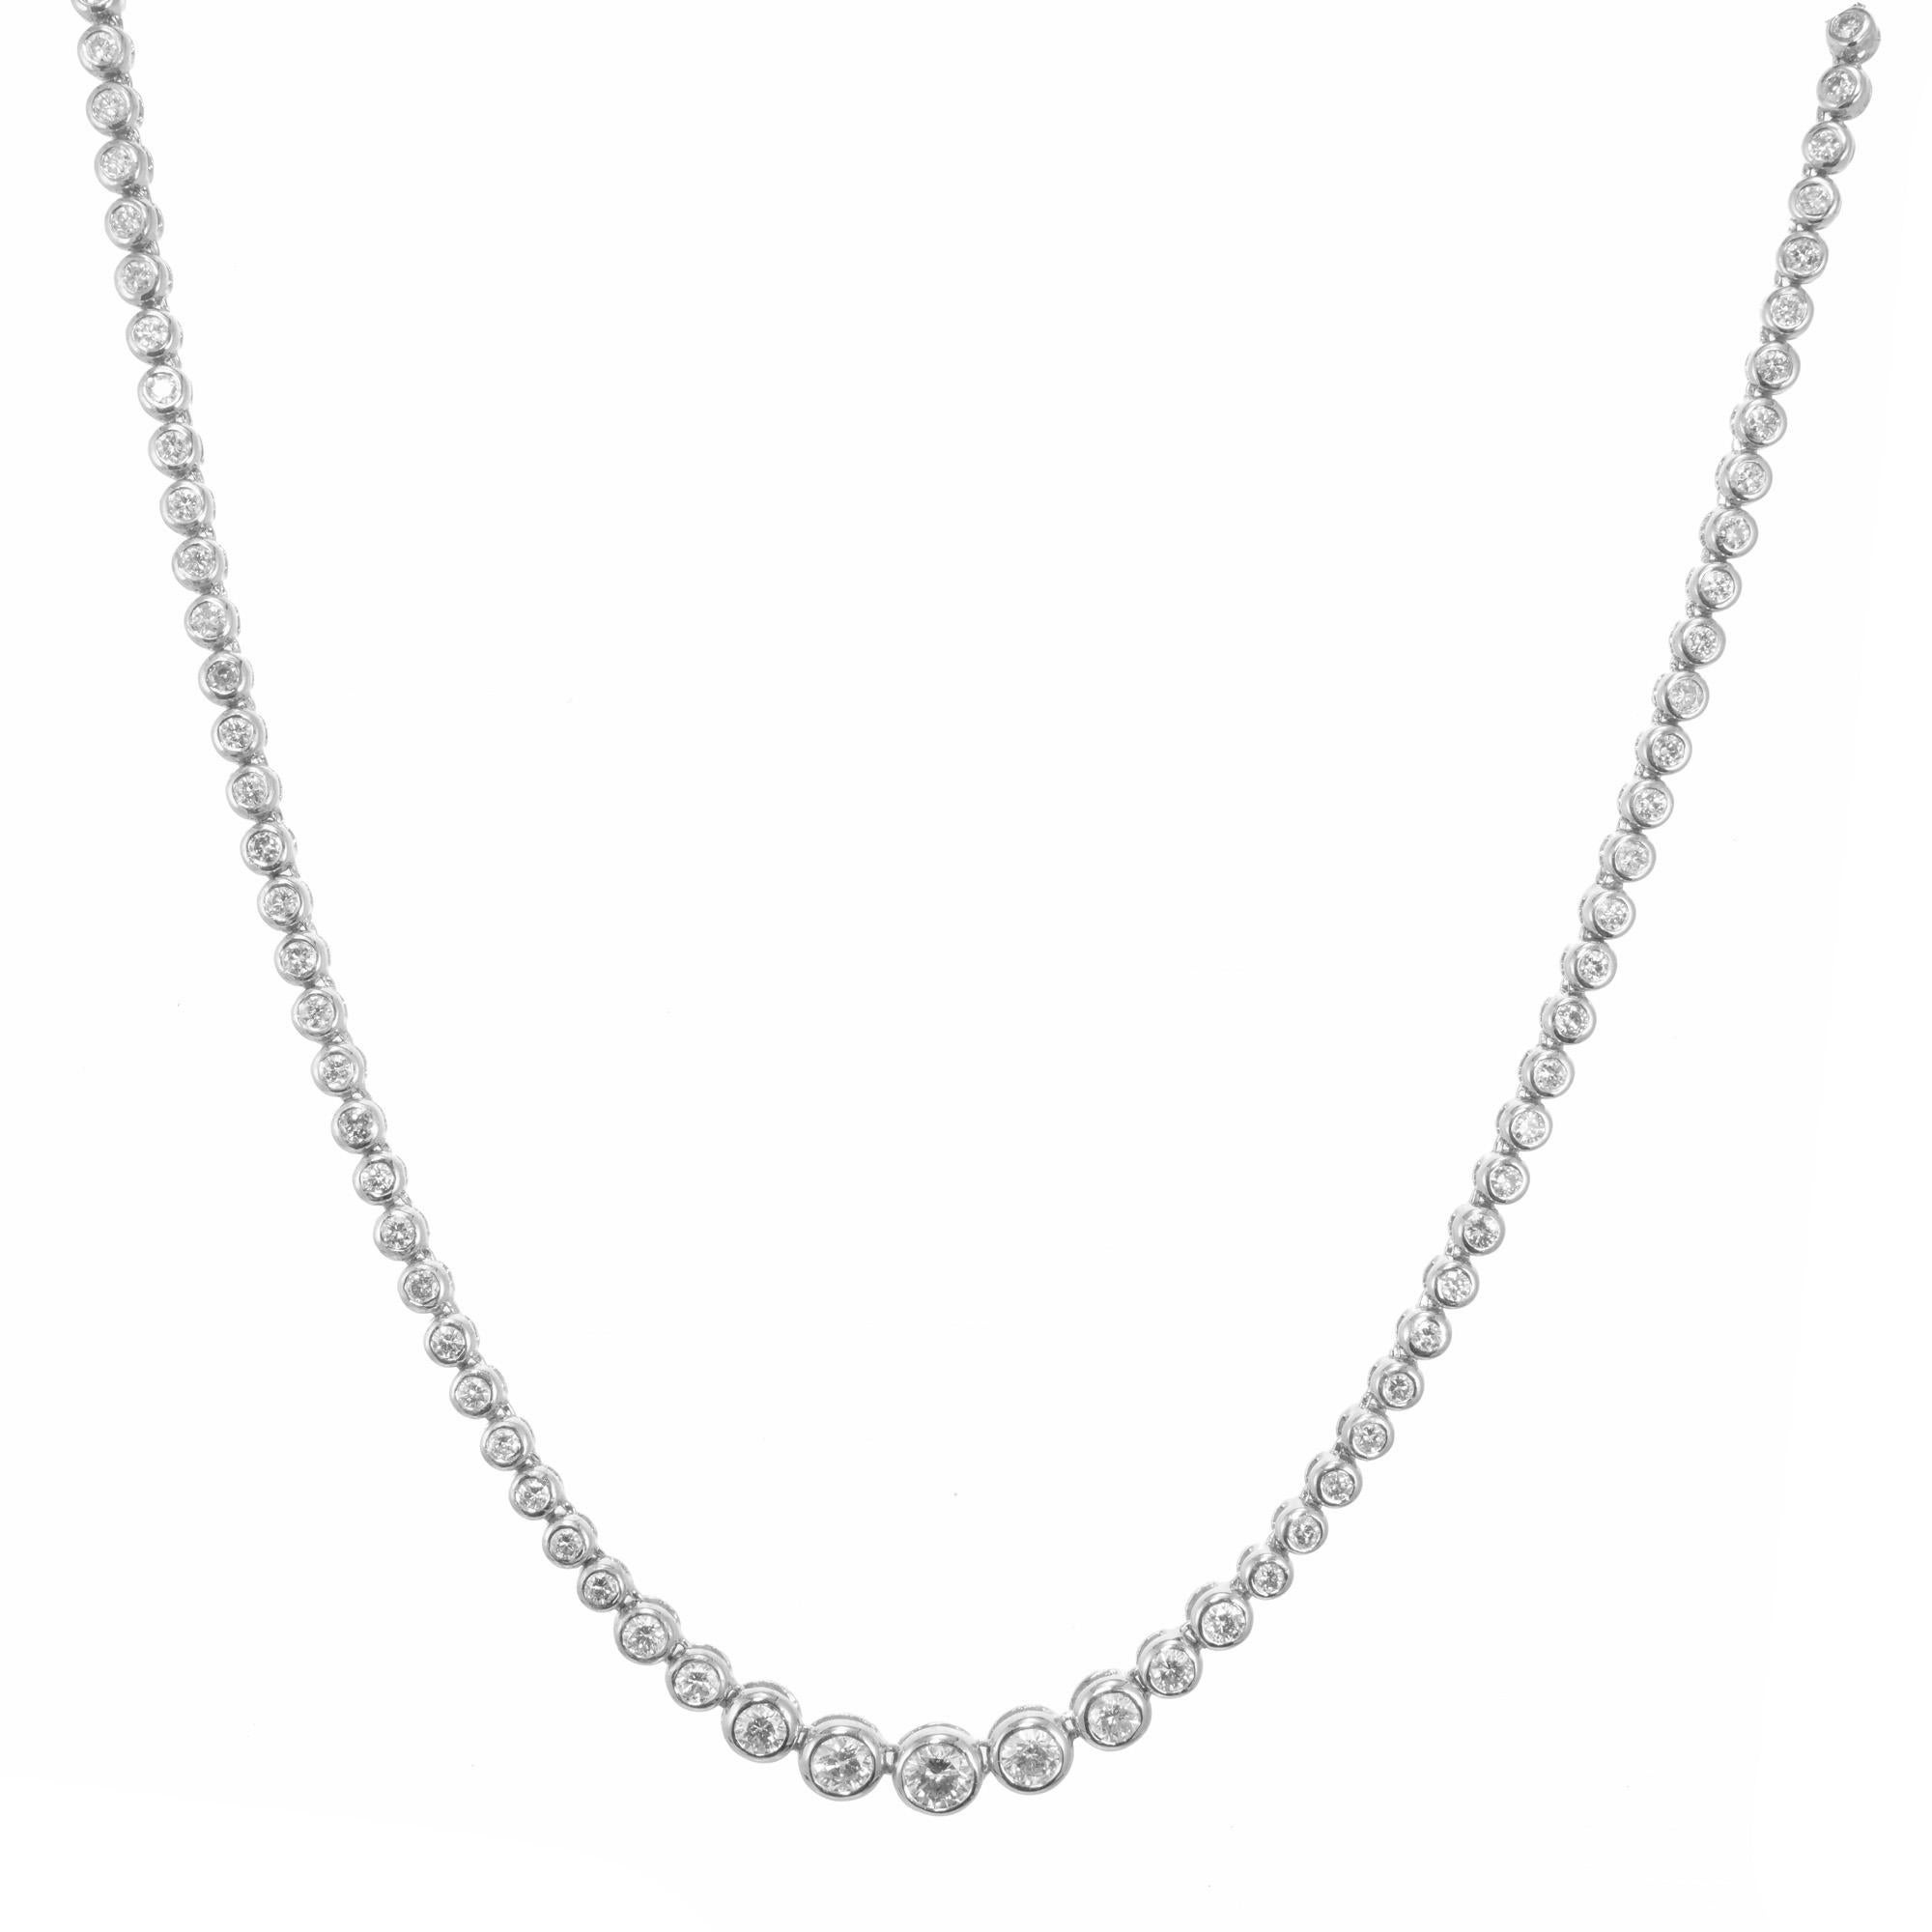 Magnificent graduated bezel set diamond tennis necklace. 103 round brilliant cut diamonds in 18k white gold bezels. 16 inches long with a built in safety.

103 round brilliant cut diamonds, H-I SI approx. 4.25cts
18k white gold 
Stamped: 18k
20.1